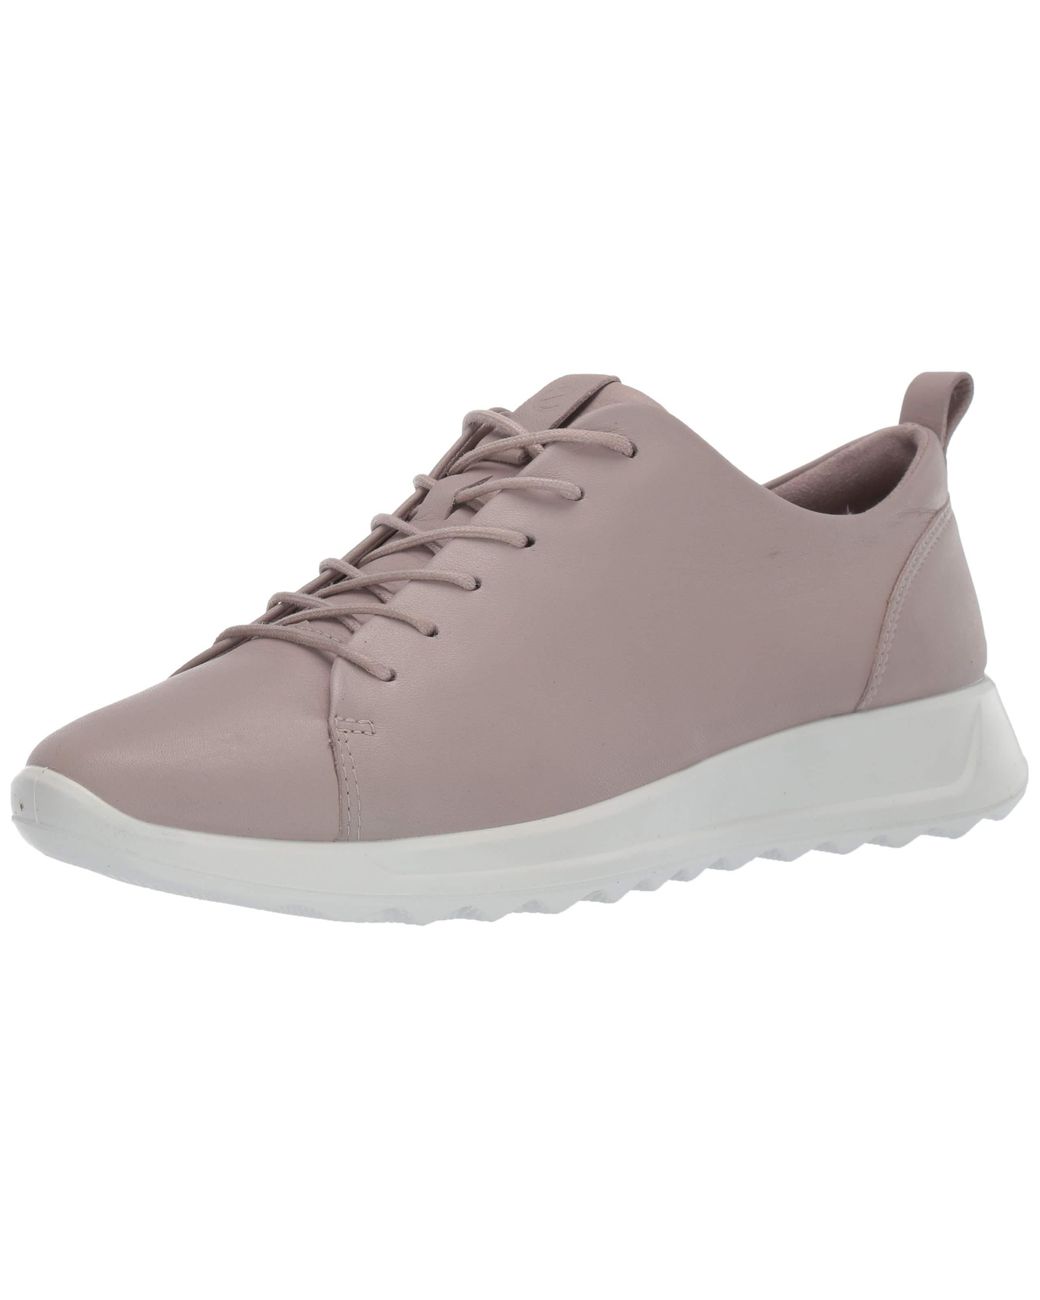 Ecco Leather Flexure Runner Tie Sneaker in Grey Rose (Gray) - Save 48% -  Lyst